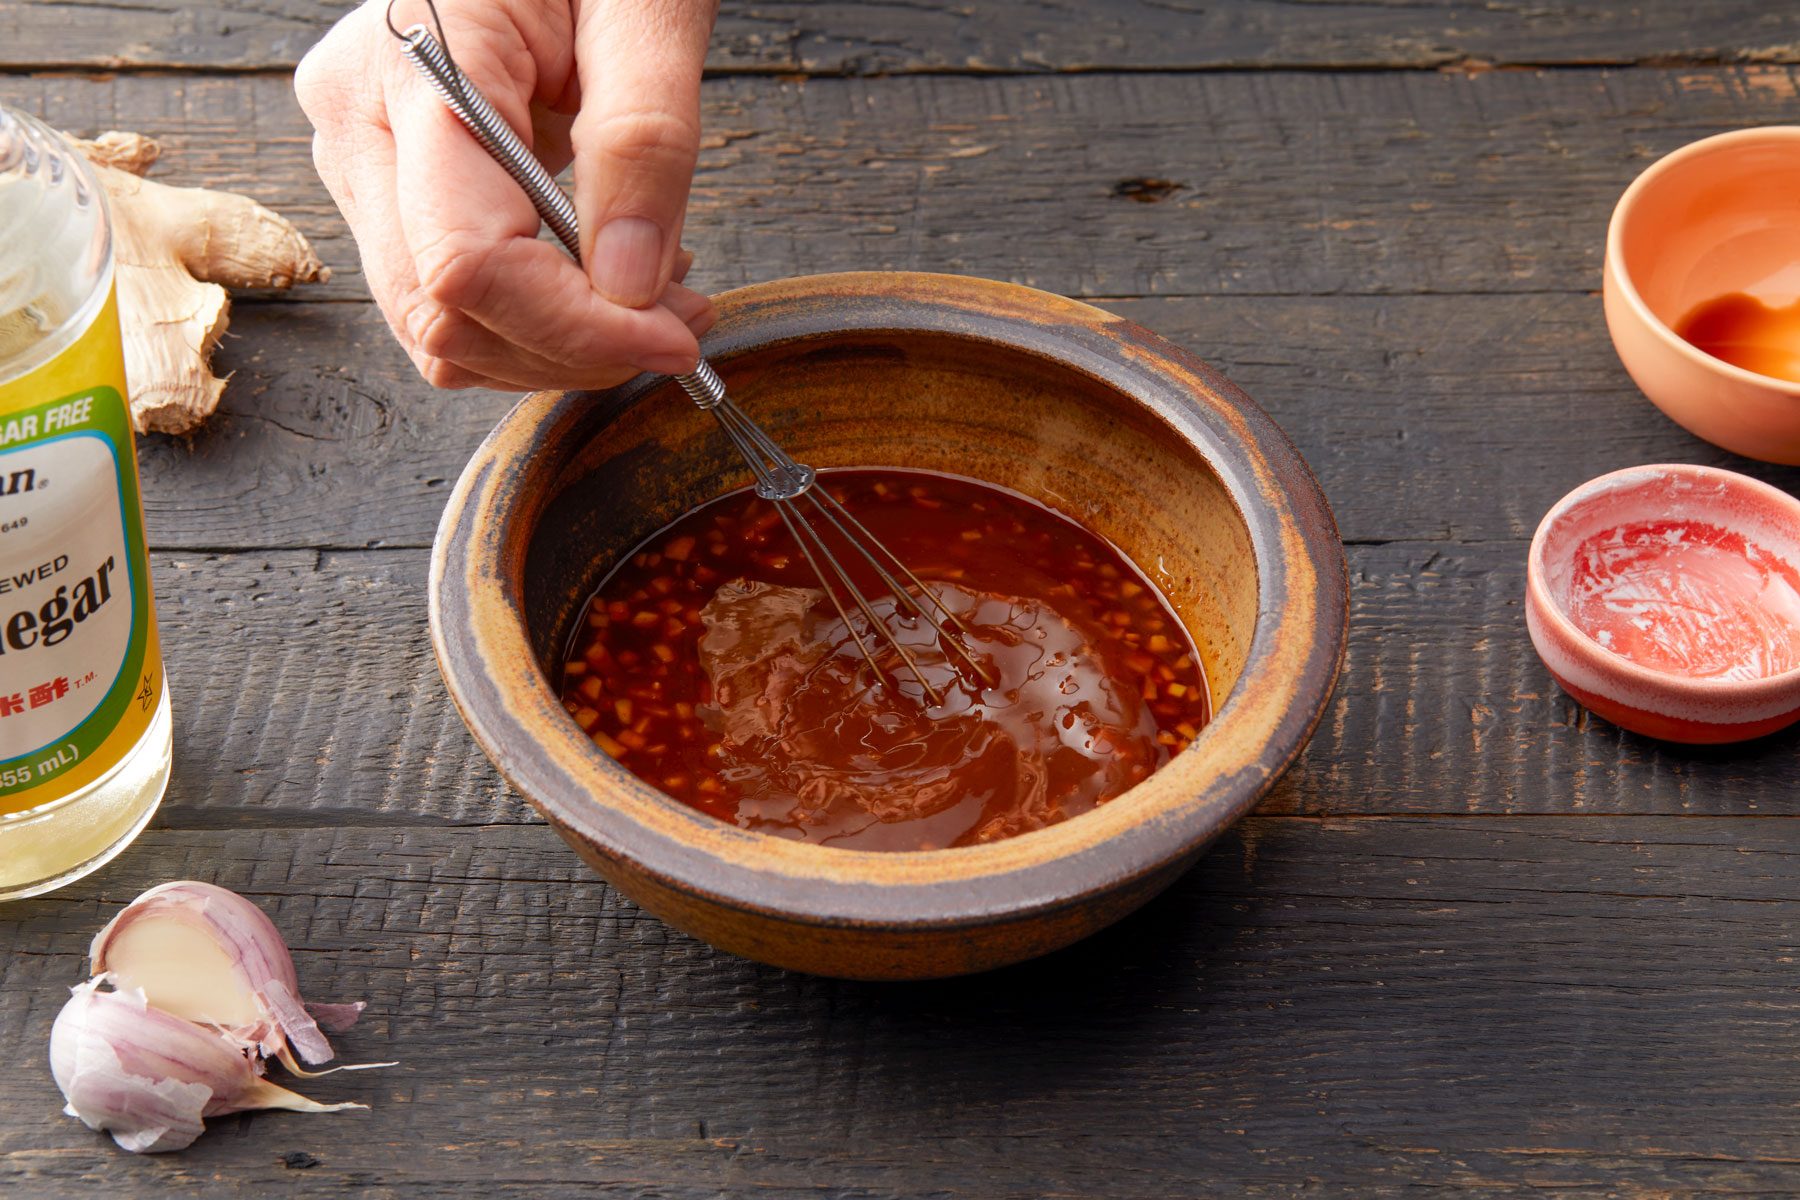 A Hand Whisking a Sauce in a Bowl